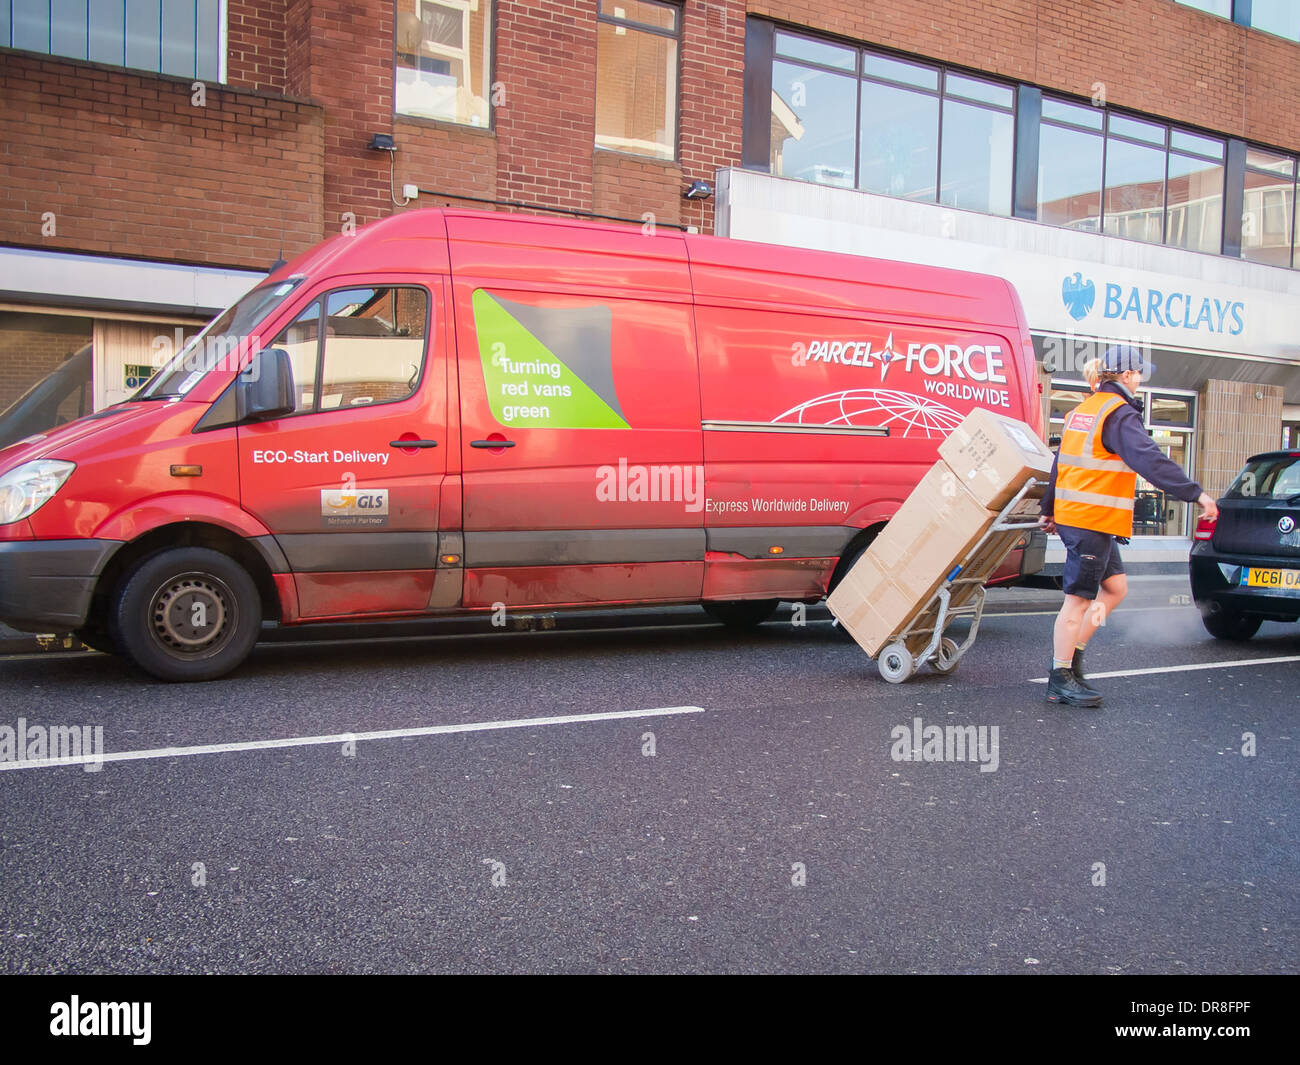 Parcel Force delivery van with delivery driver pulling stacked parcels across a road using a handtruck box carrier Stock Photo